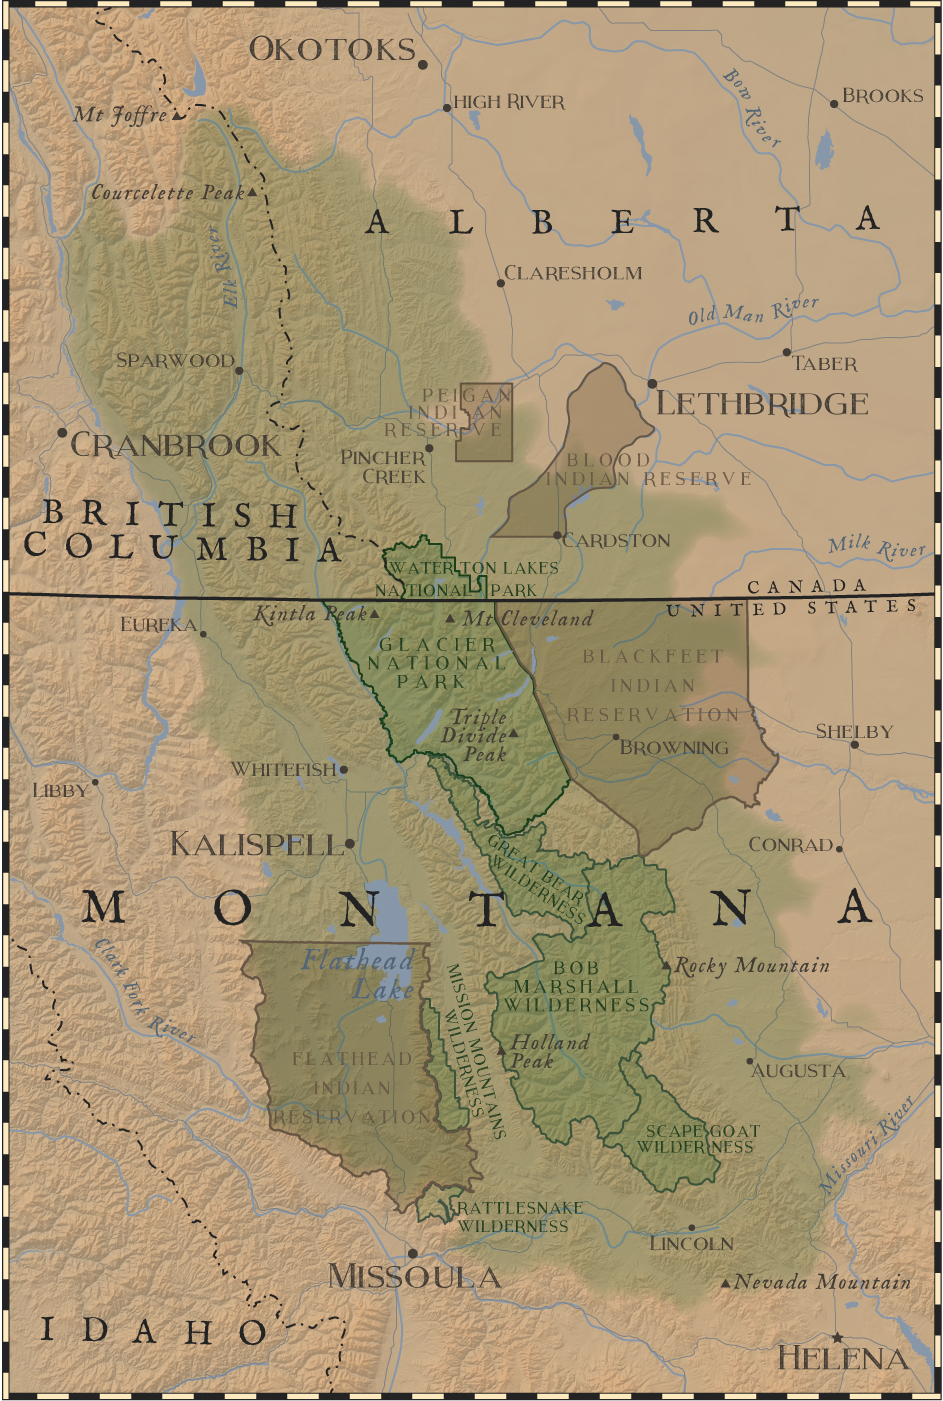 map of Crown of the Continent area of Montana, USA, and British Columbia and Alberta, Canada